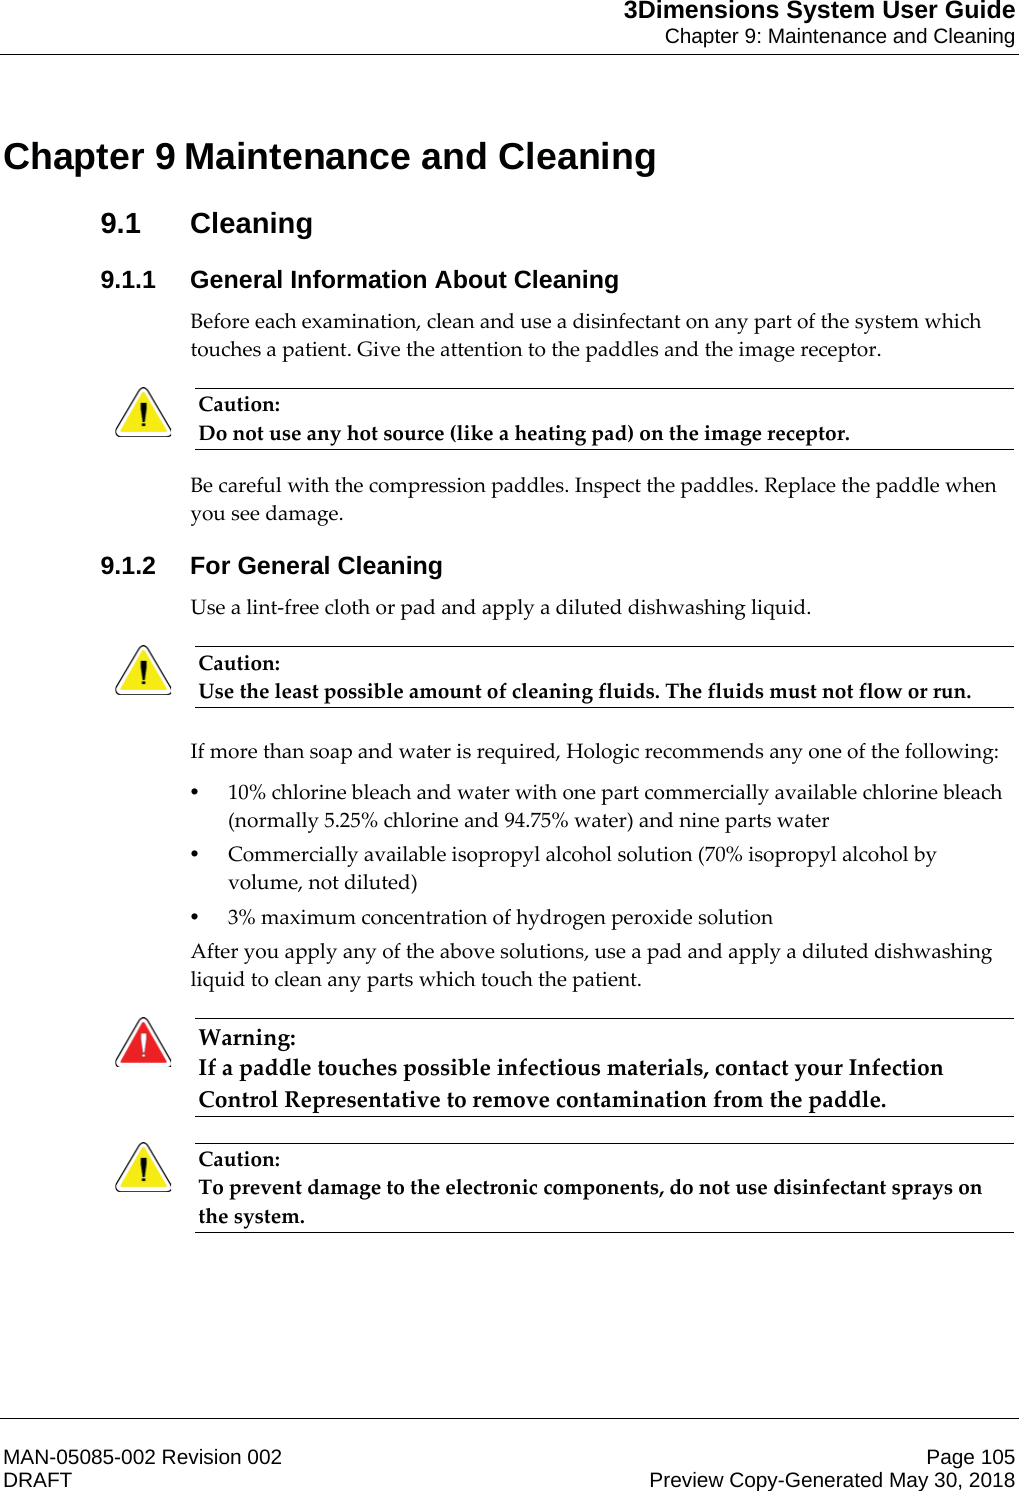 3Dimensions System User GuideChapter 9: Maintenance and CleaningMAN-05085-002 Revision 002 Page 105DRAFT Preview Copy-Generated May 30, 20189: Maintenance and Cleaning9.1 Cleaning9.1.1 General Information About CleaningBefore each examination, clean and use a disinfectant on any part of the system which touches a patient. Give the attention to the paddles and the image receptor. Caution: Do not use any hot source (like a heating pad) on the image receptor. Be careful with the compression paddles. Inspect the paddles. Replace the paddle when you see damage. 9.1.2 For General CleaningUse a lint-free cloth or pad and apply a diluted dishwashing liquid. Caution: Use the least possible amount of cleaning fluids. The fluids must not flow or run.    If more than soap and water is required, Hologic recommends any one of the following: •10% chlorine bleach and water with one part commercially available chlorine bleach (normally 5.25% chlorine and 94.75% water) and nine parts water •Commercially available isopropyl alcohol solution (70% isopropyl alcohol by volume, not diluted) •3% maximum concentration of hydrogen peroxide solution After you apply any of the above solutions, use a pad and apply a diluted dishwashing liquid to clean any parts which touch the patient. Warning: If a paddle touches possible infectious materials, contact your Infection Control Representative to remove contamination from the paddle.    Caution: To prevent damage to the electronic components, do not use disinfectant sprays on the system.    Chapter 9